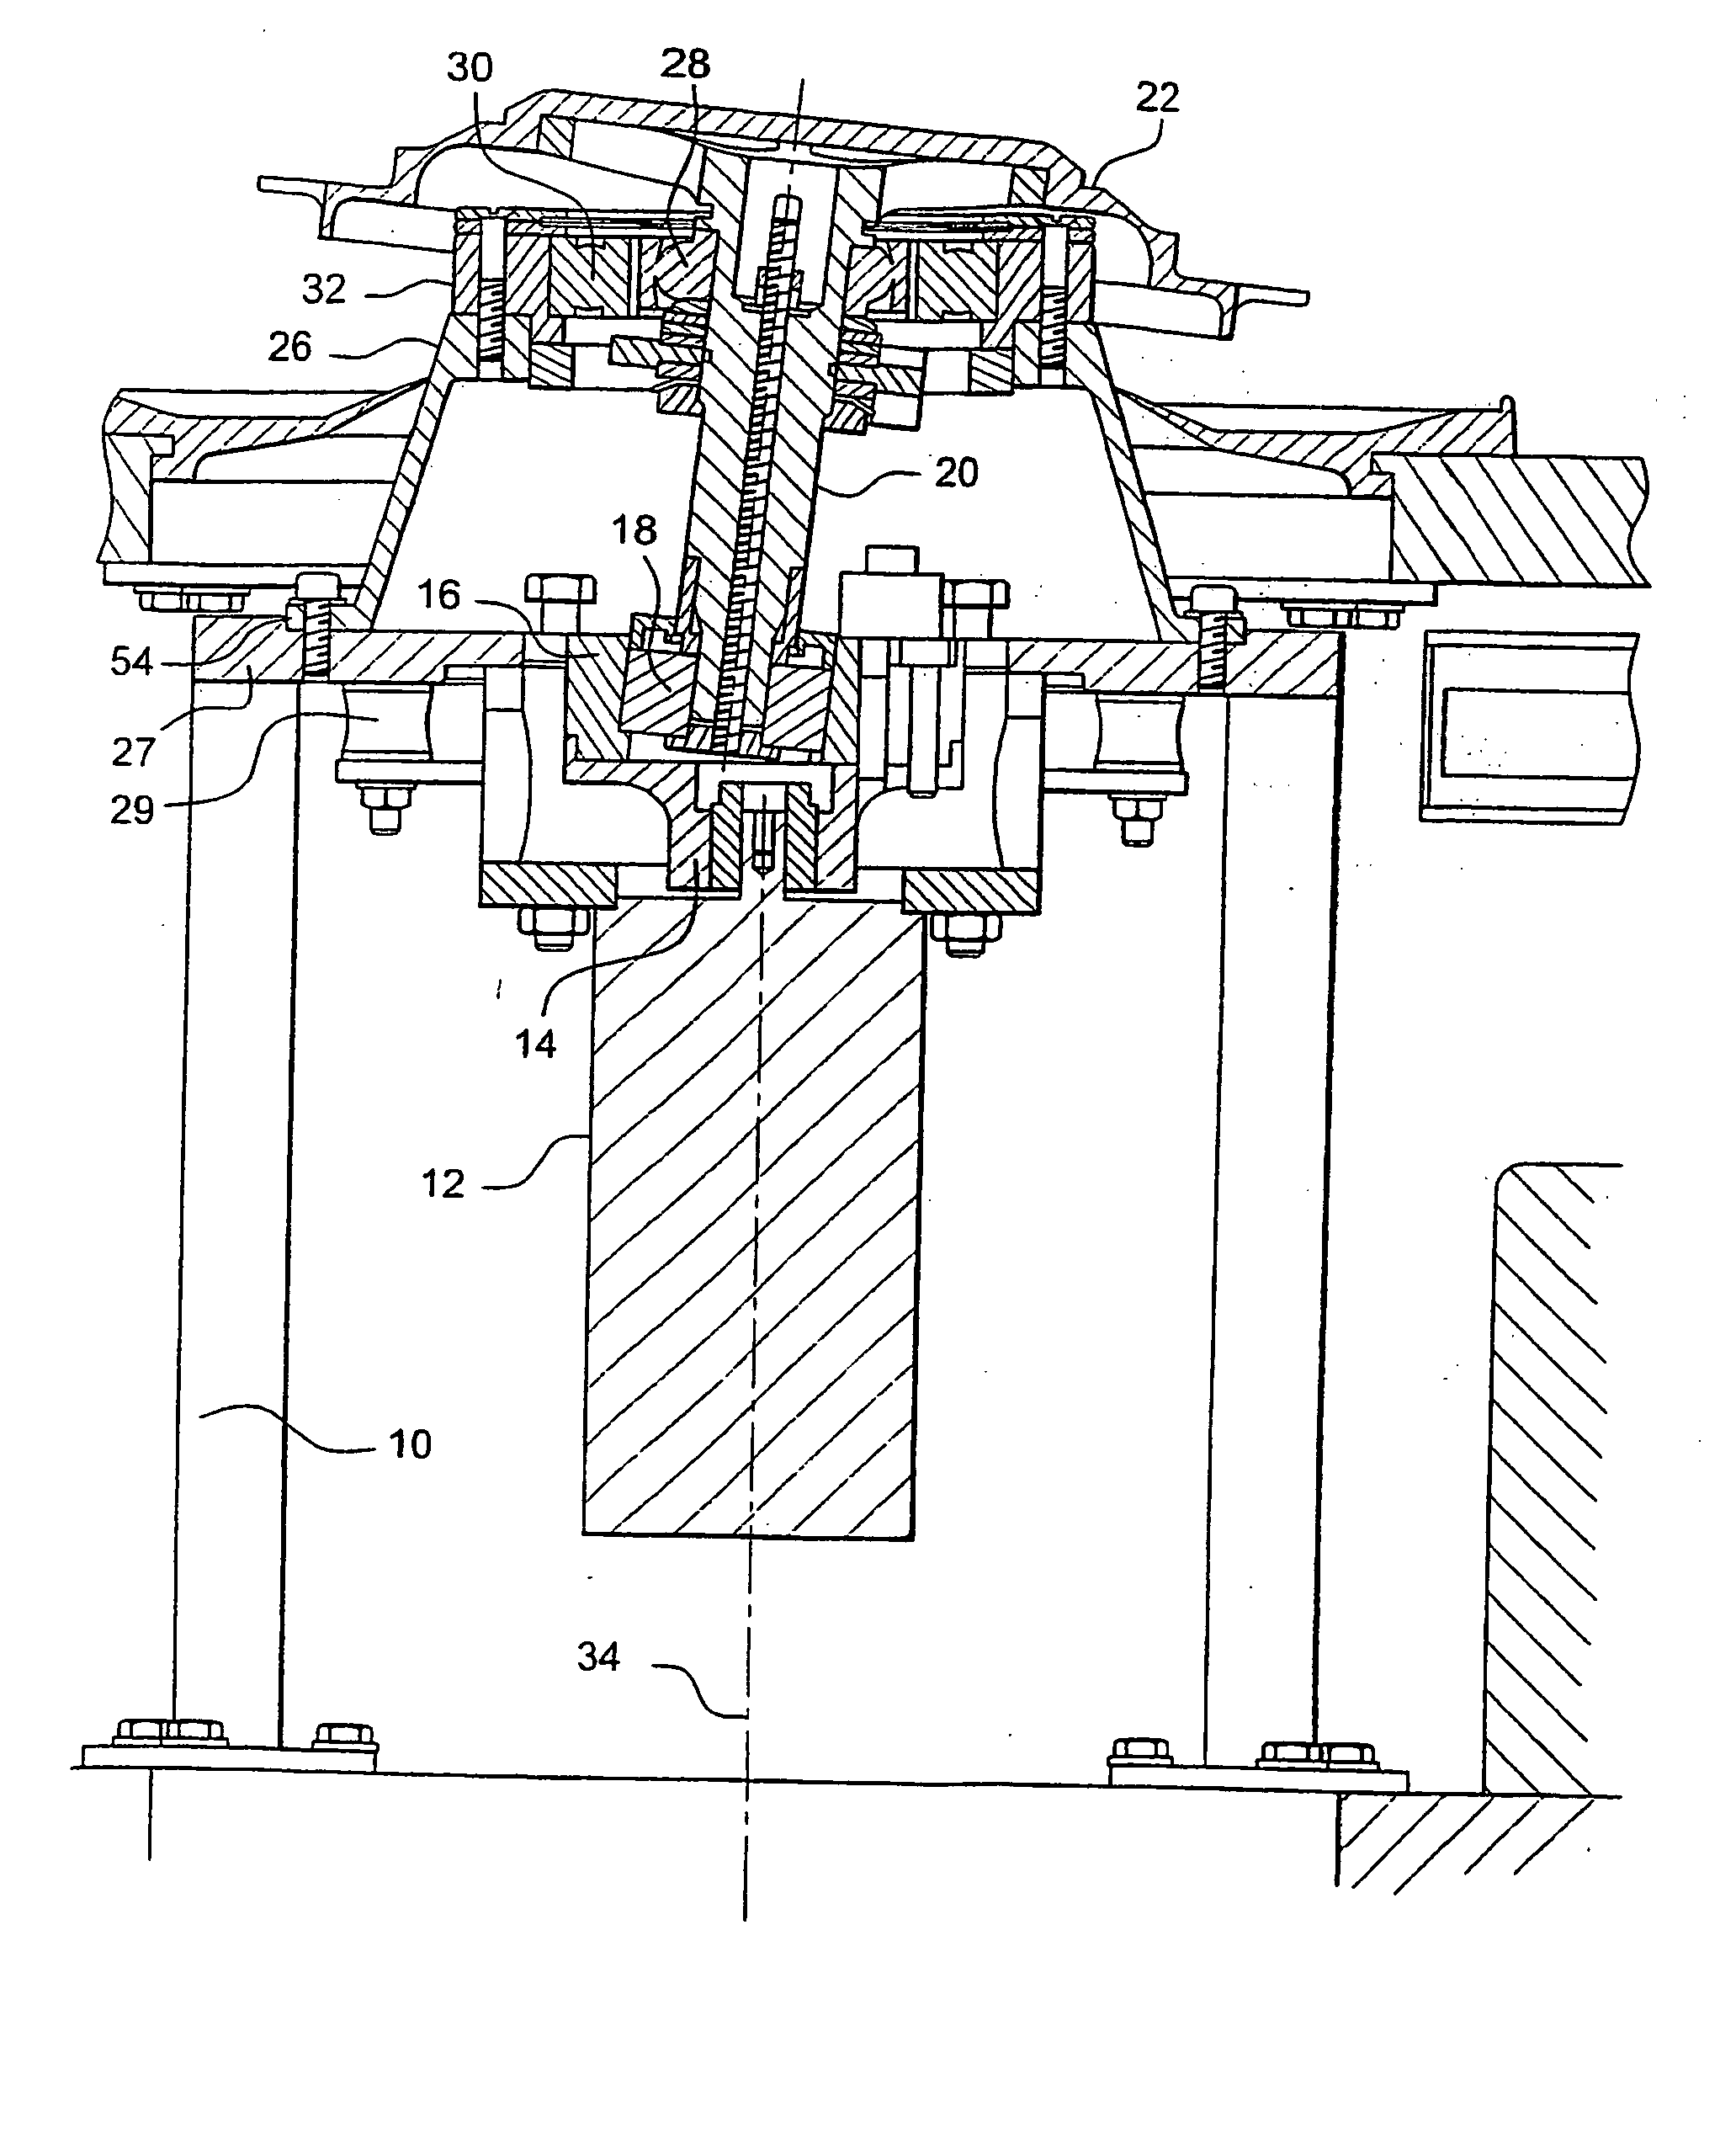 Device for fast vibration of tubes containing samples